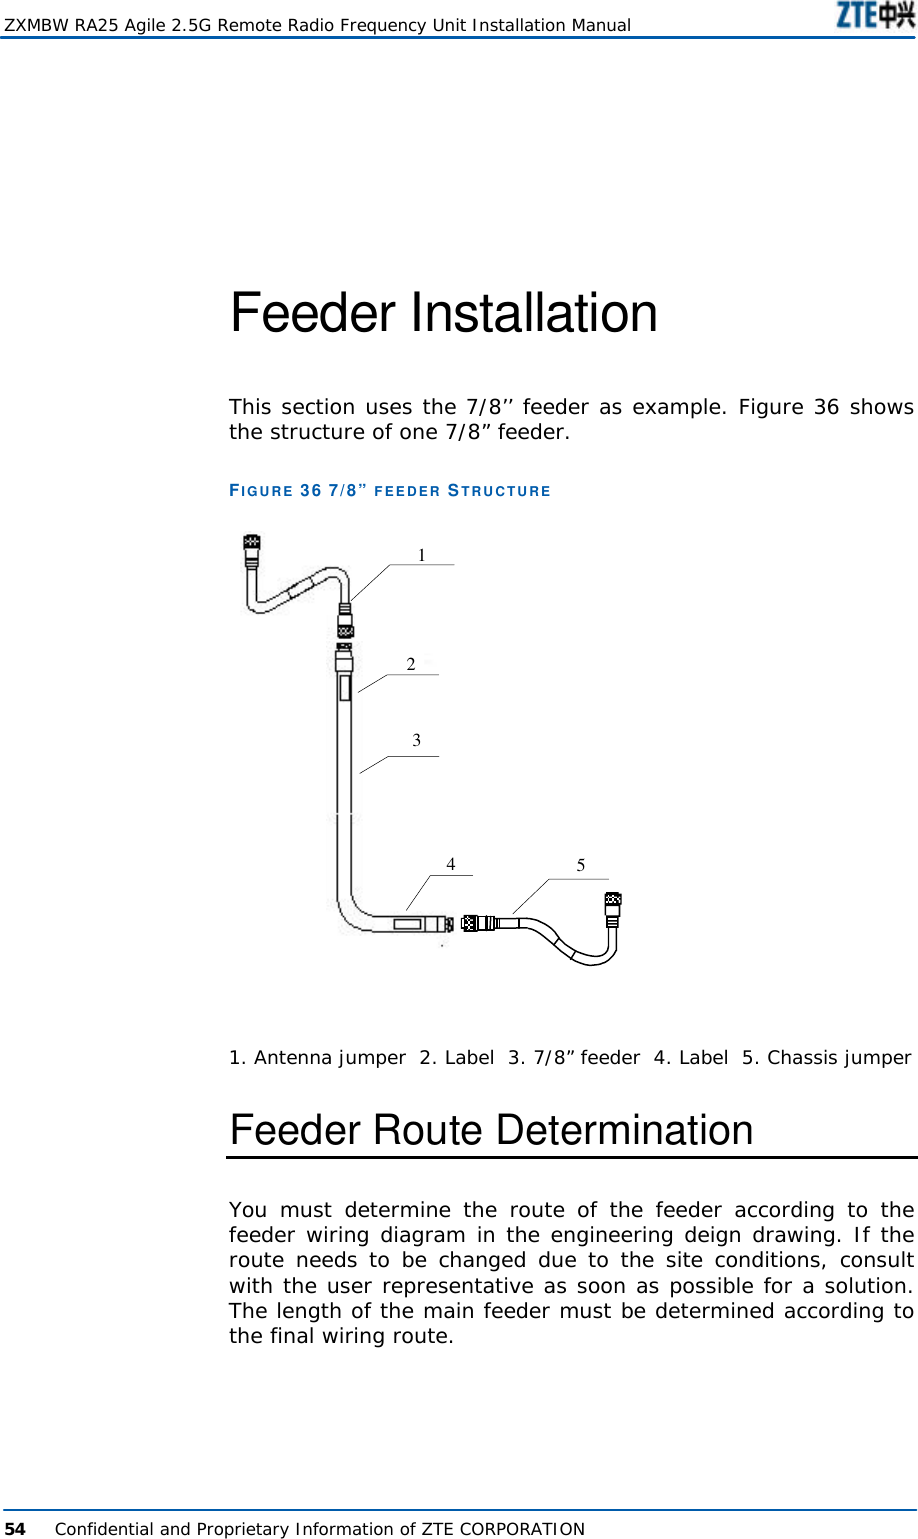  ZXMBW RA25 Agile 2.5G Remote Radio Frequency Unit Installation Manual  54      Confidential and Proprietary Information of ZTE CORPORATION  Feeder Installation  This section uses the 7/8’’ feeder as example. Figure 36 shows the structure of one 7/8” feeder.  FIGURE 36 7/8” FEEDER STRUCTURE 23451  1. Antenna jumper  2. Label  3. 7/8” feeder  4. Label  5. Chassis jumper Feeder Route Determination You  must determine the route of the feeder according to the feeder wiring diagram in the engineering deign drawing. If the route needs to be changed due to the site conditions, consult with the user representative as soon as possible for a solution. The length of the main feeder must be determined according to the final wiring route.  